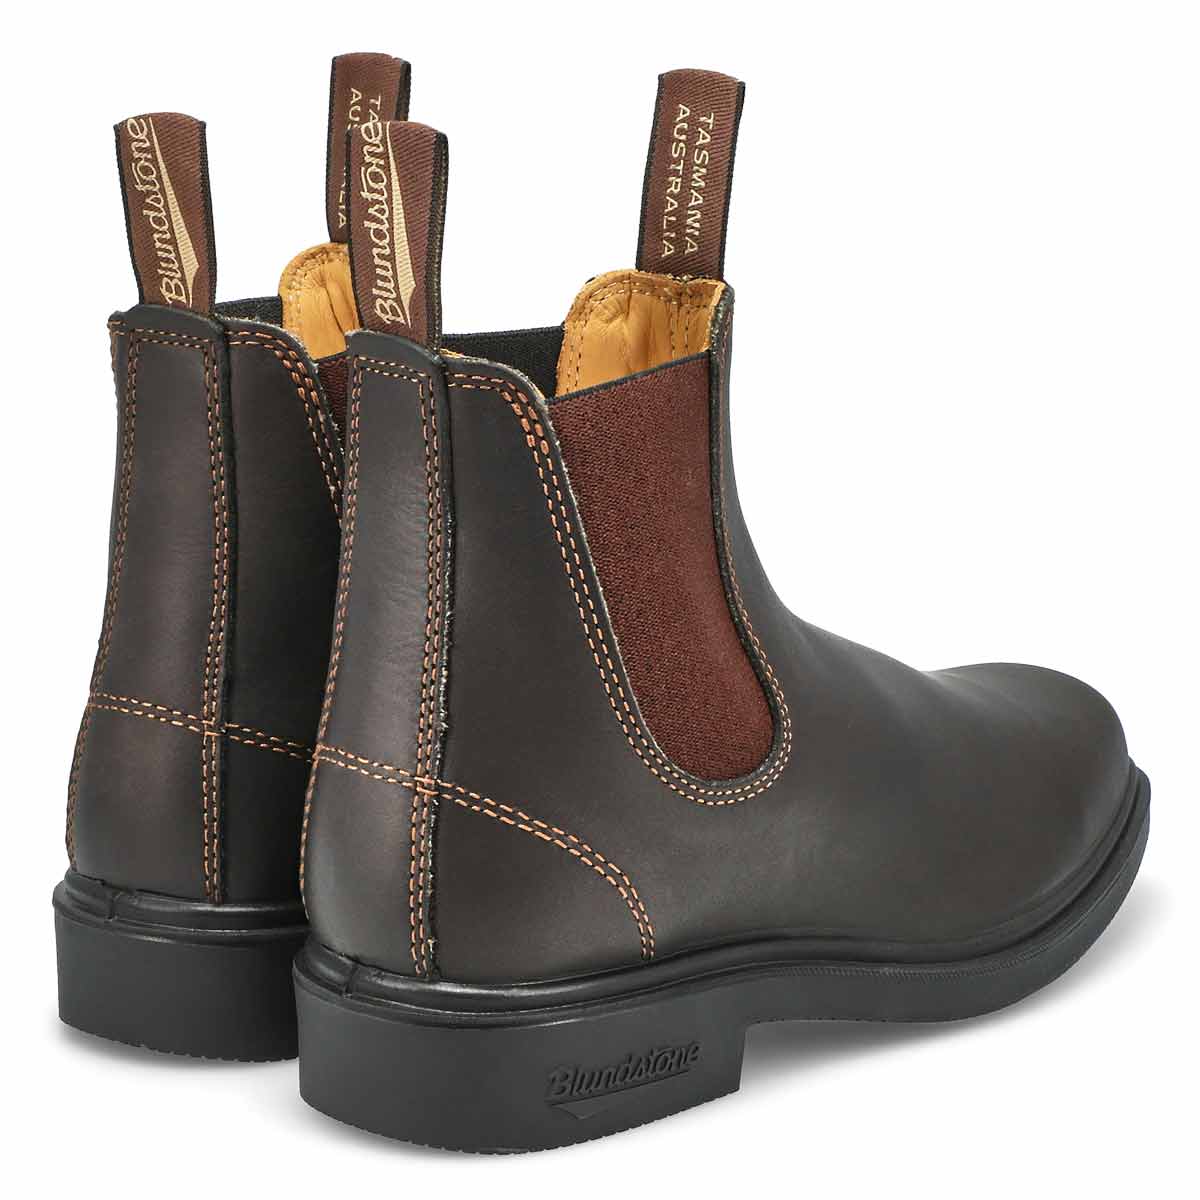 Unisex CHISEL TOE brown pull-on boots - UK SIZING